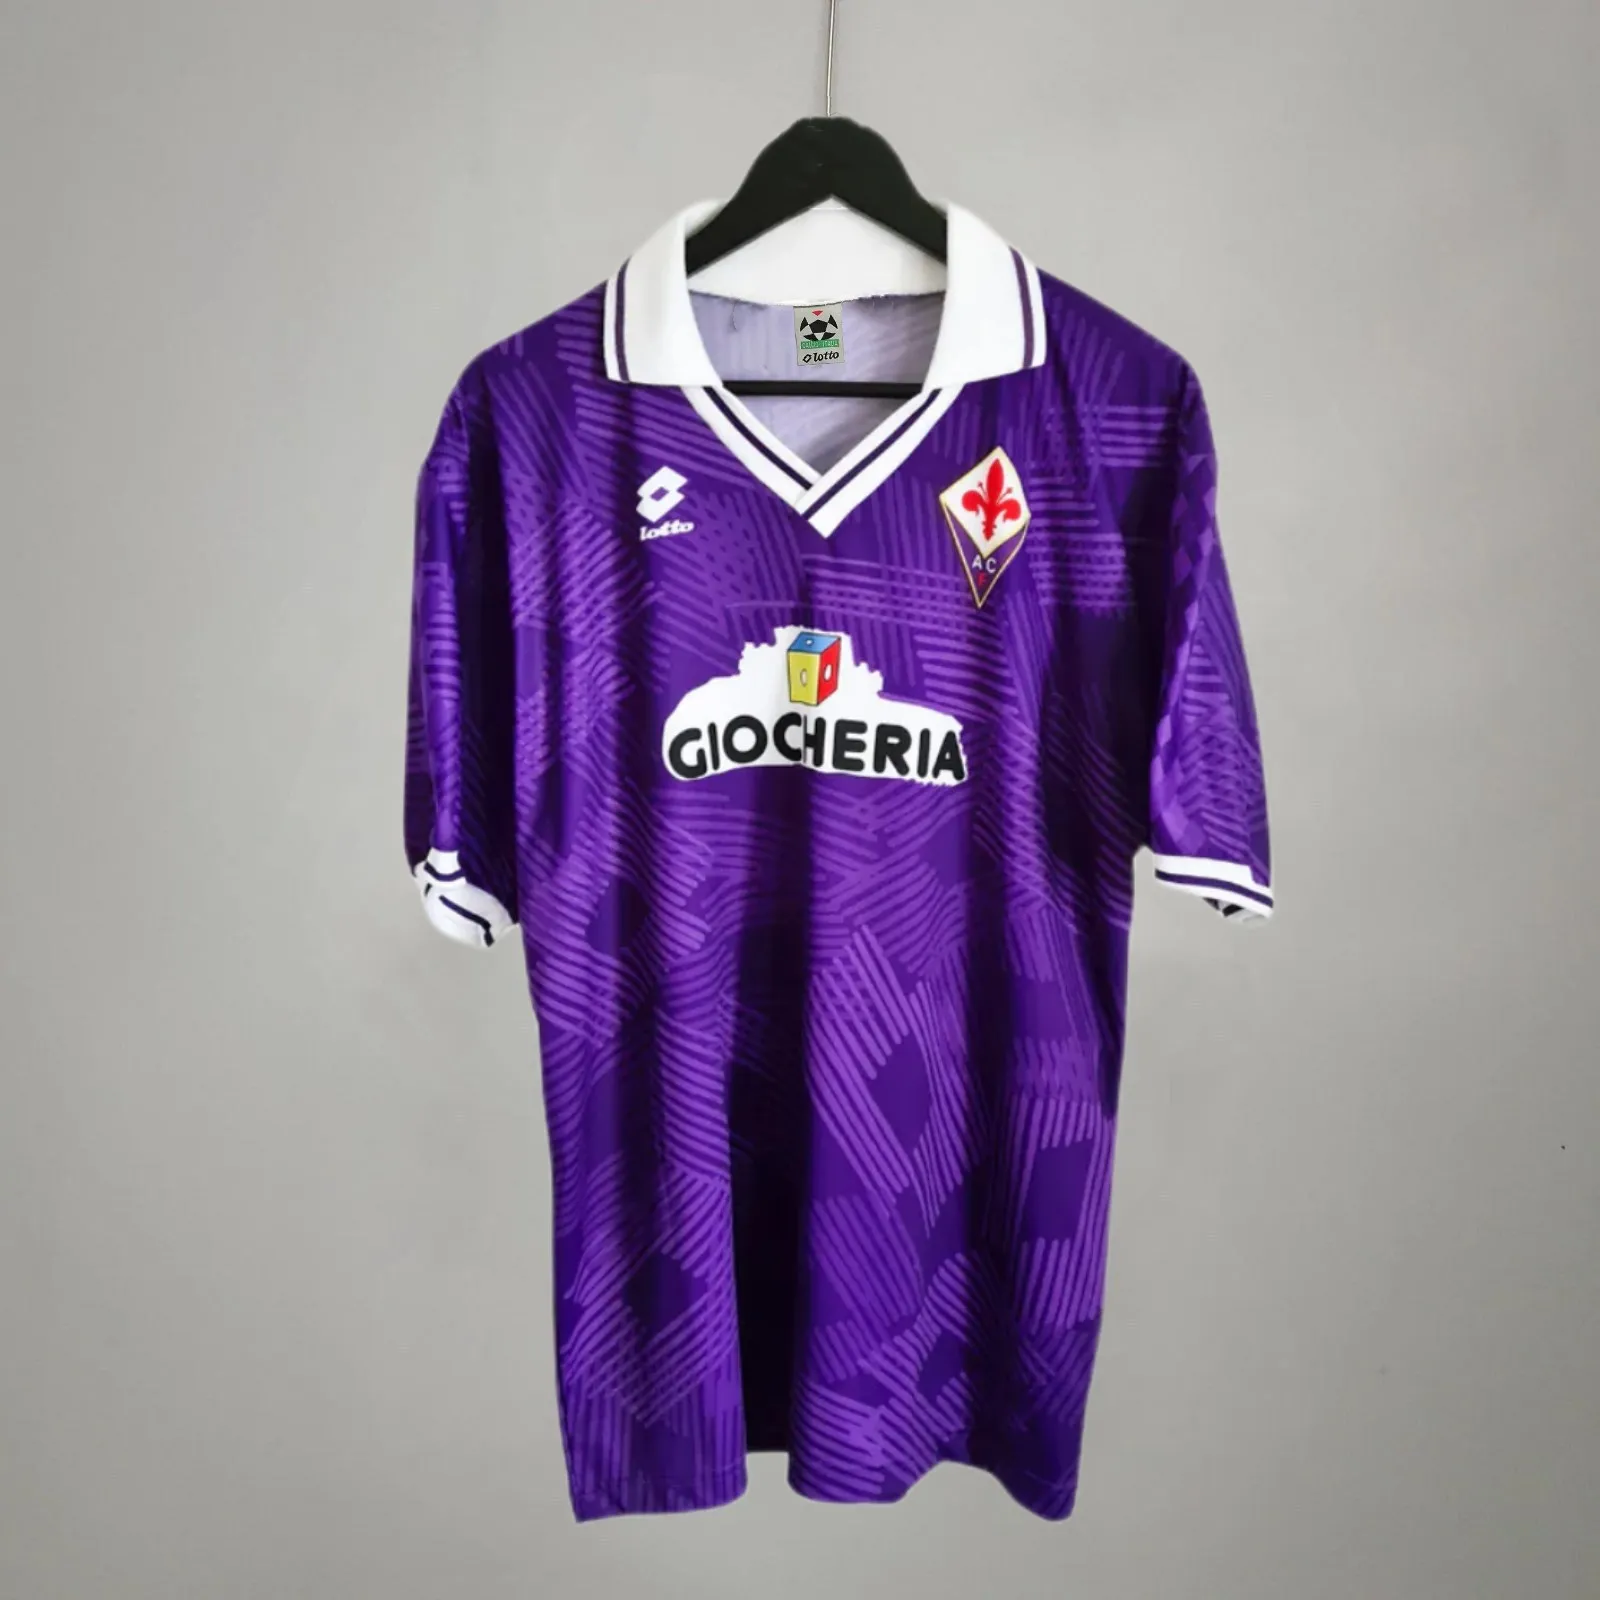 The Fiorentina 1991/1992 Home Retro Jersey: A Timeless Symbol of Loyalty, History, and Community